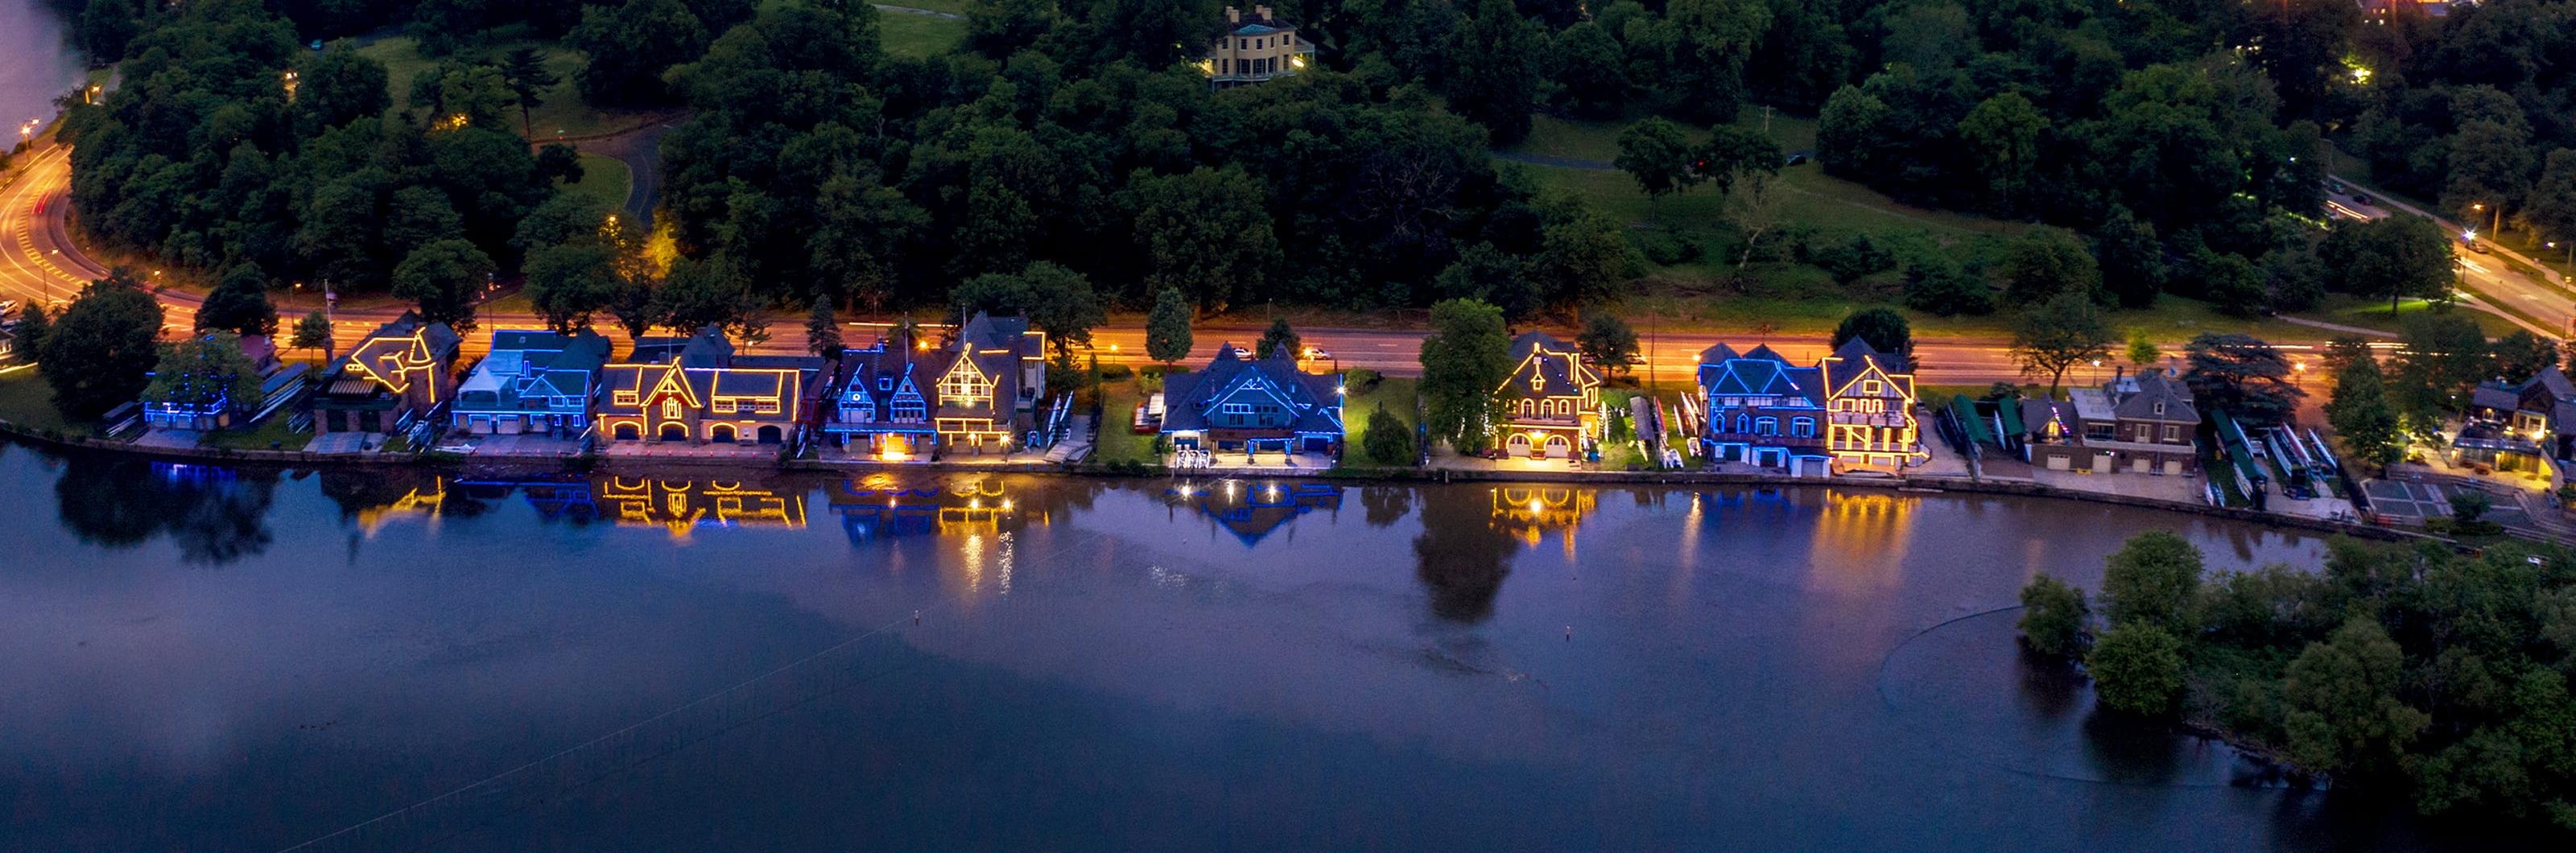 Boathouse row lit up during the evening